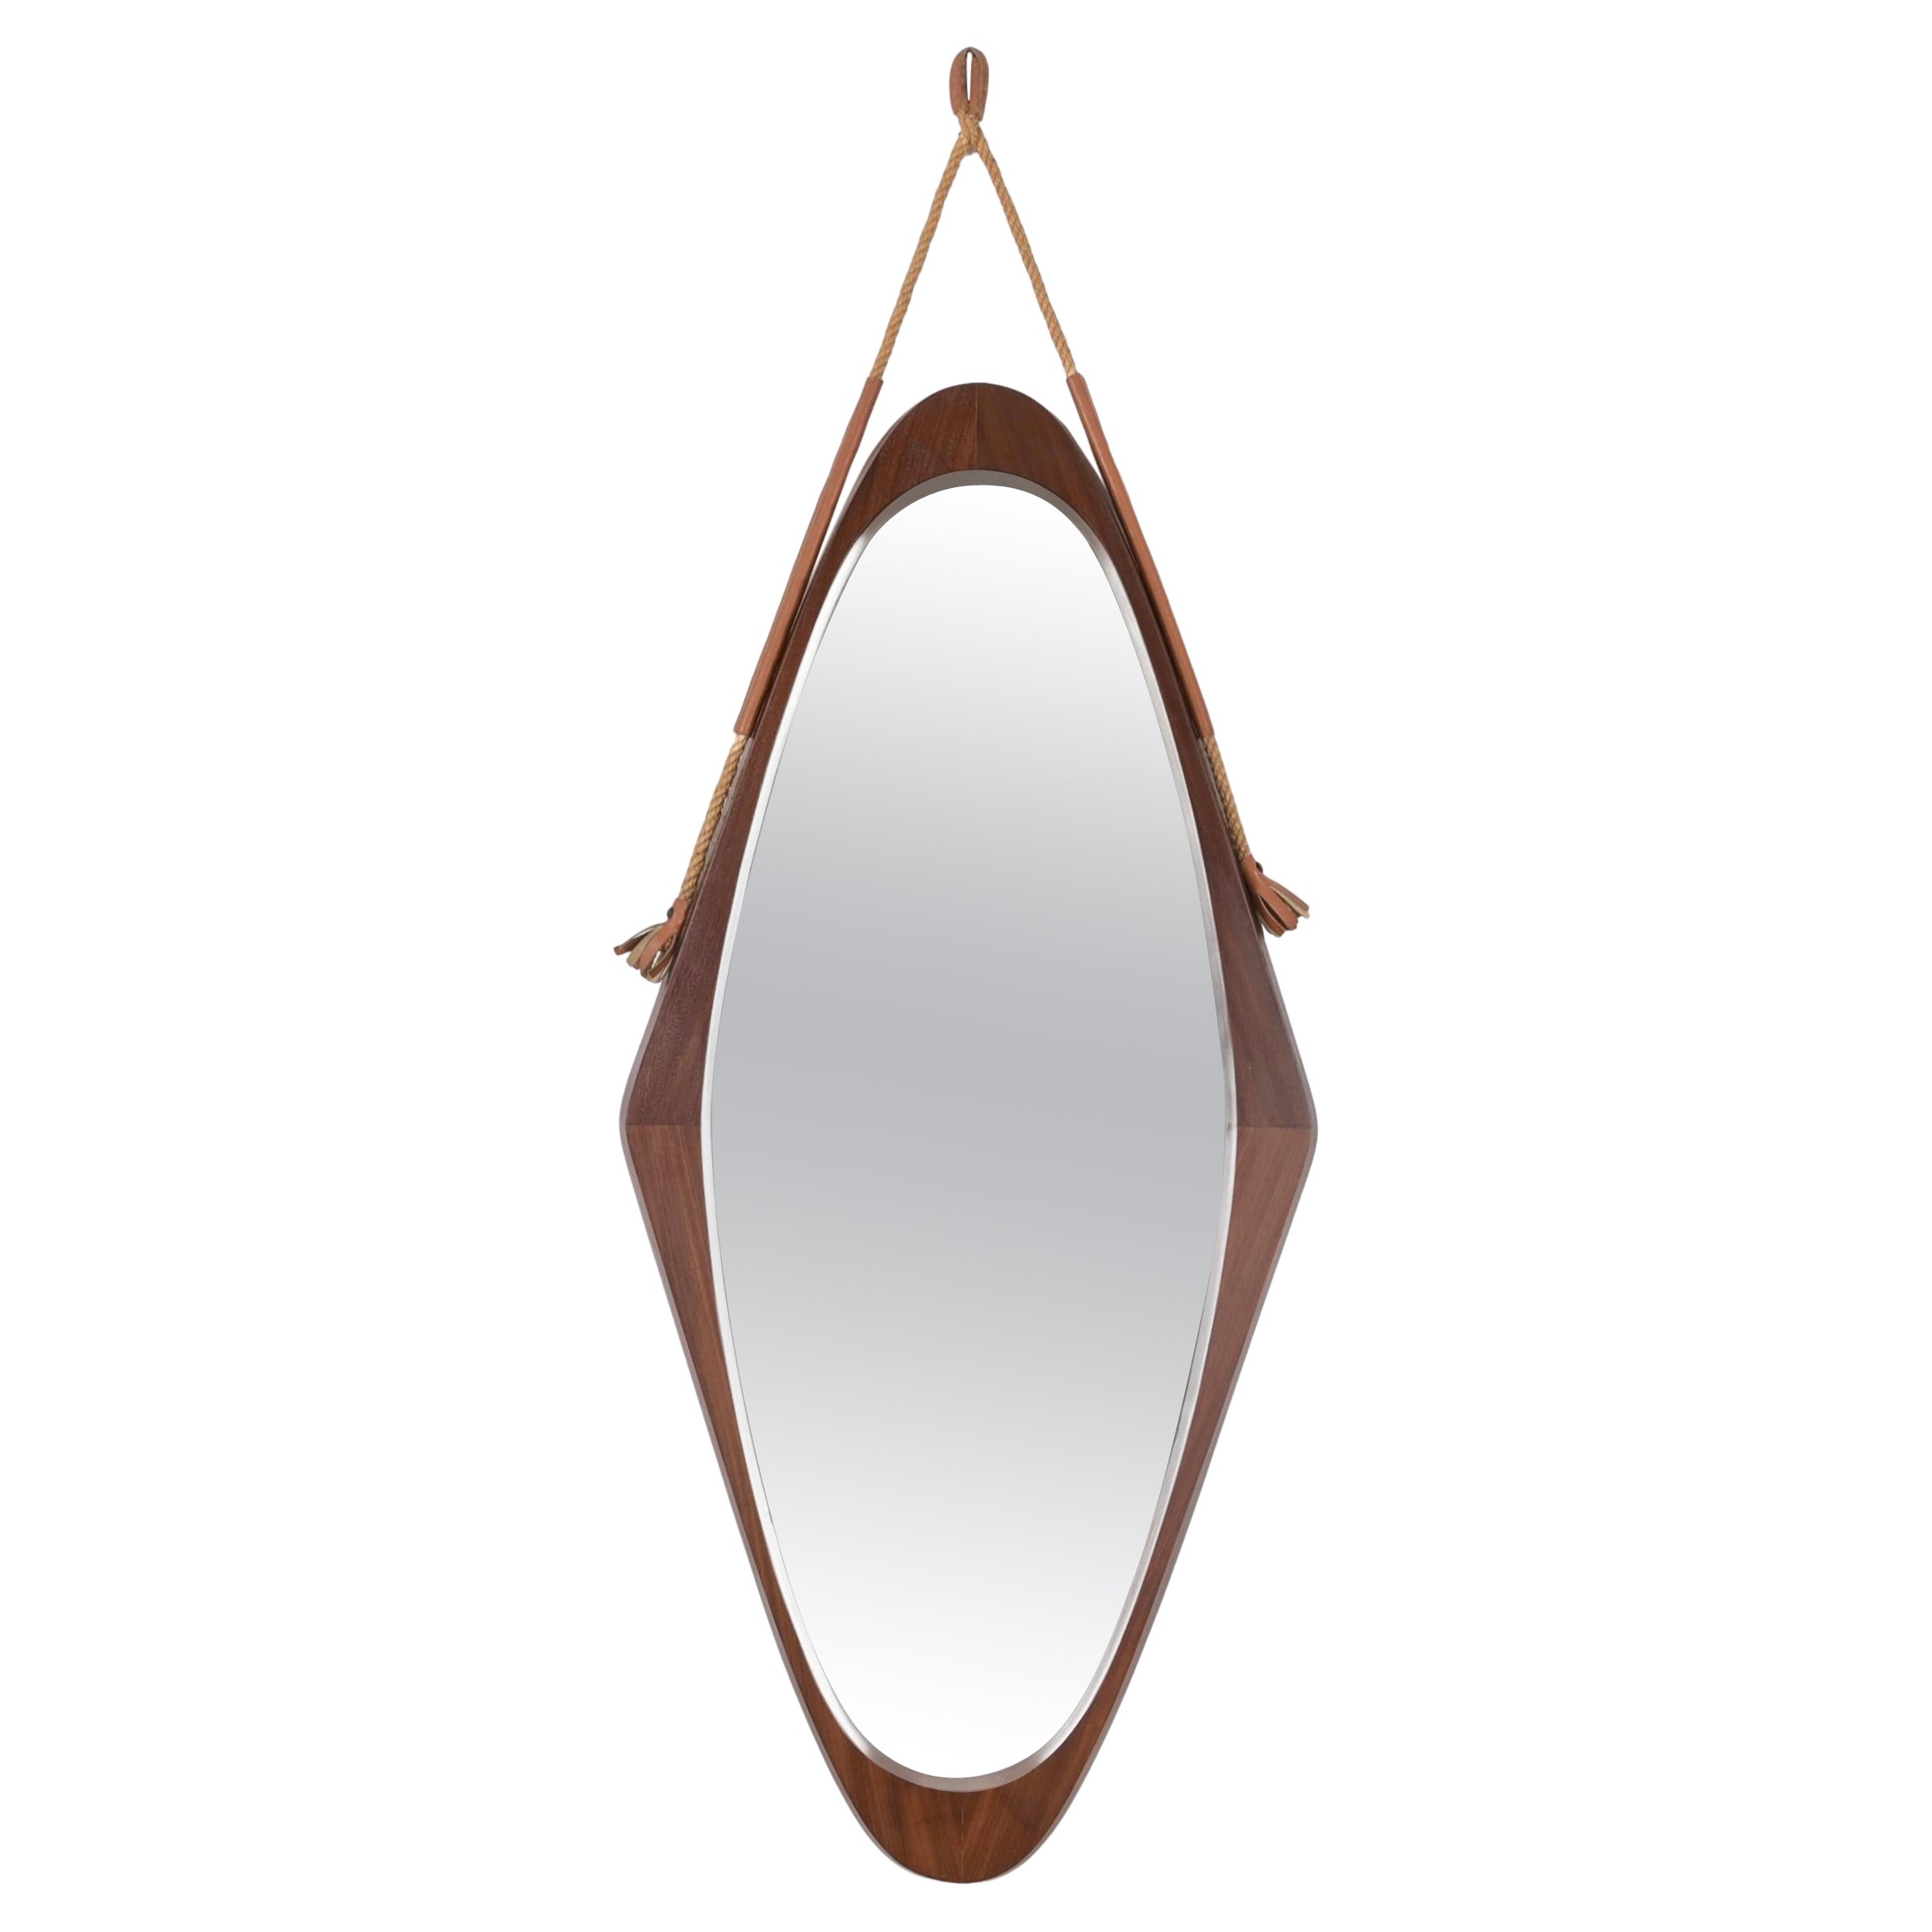 Midcentury Italian Oval "Shield" Mirror in Curved Teak, Rope and Leather, 1960s For Sale